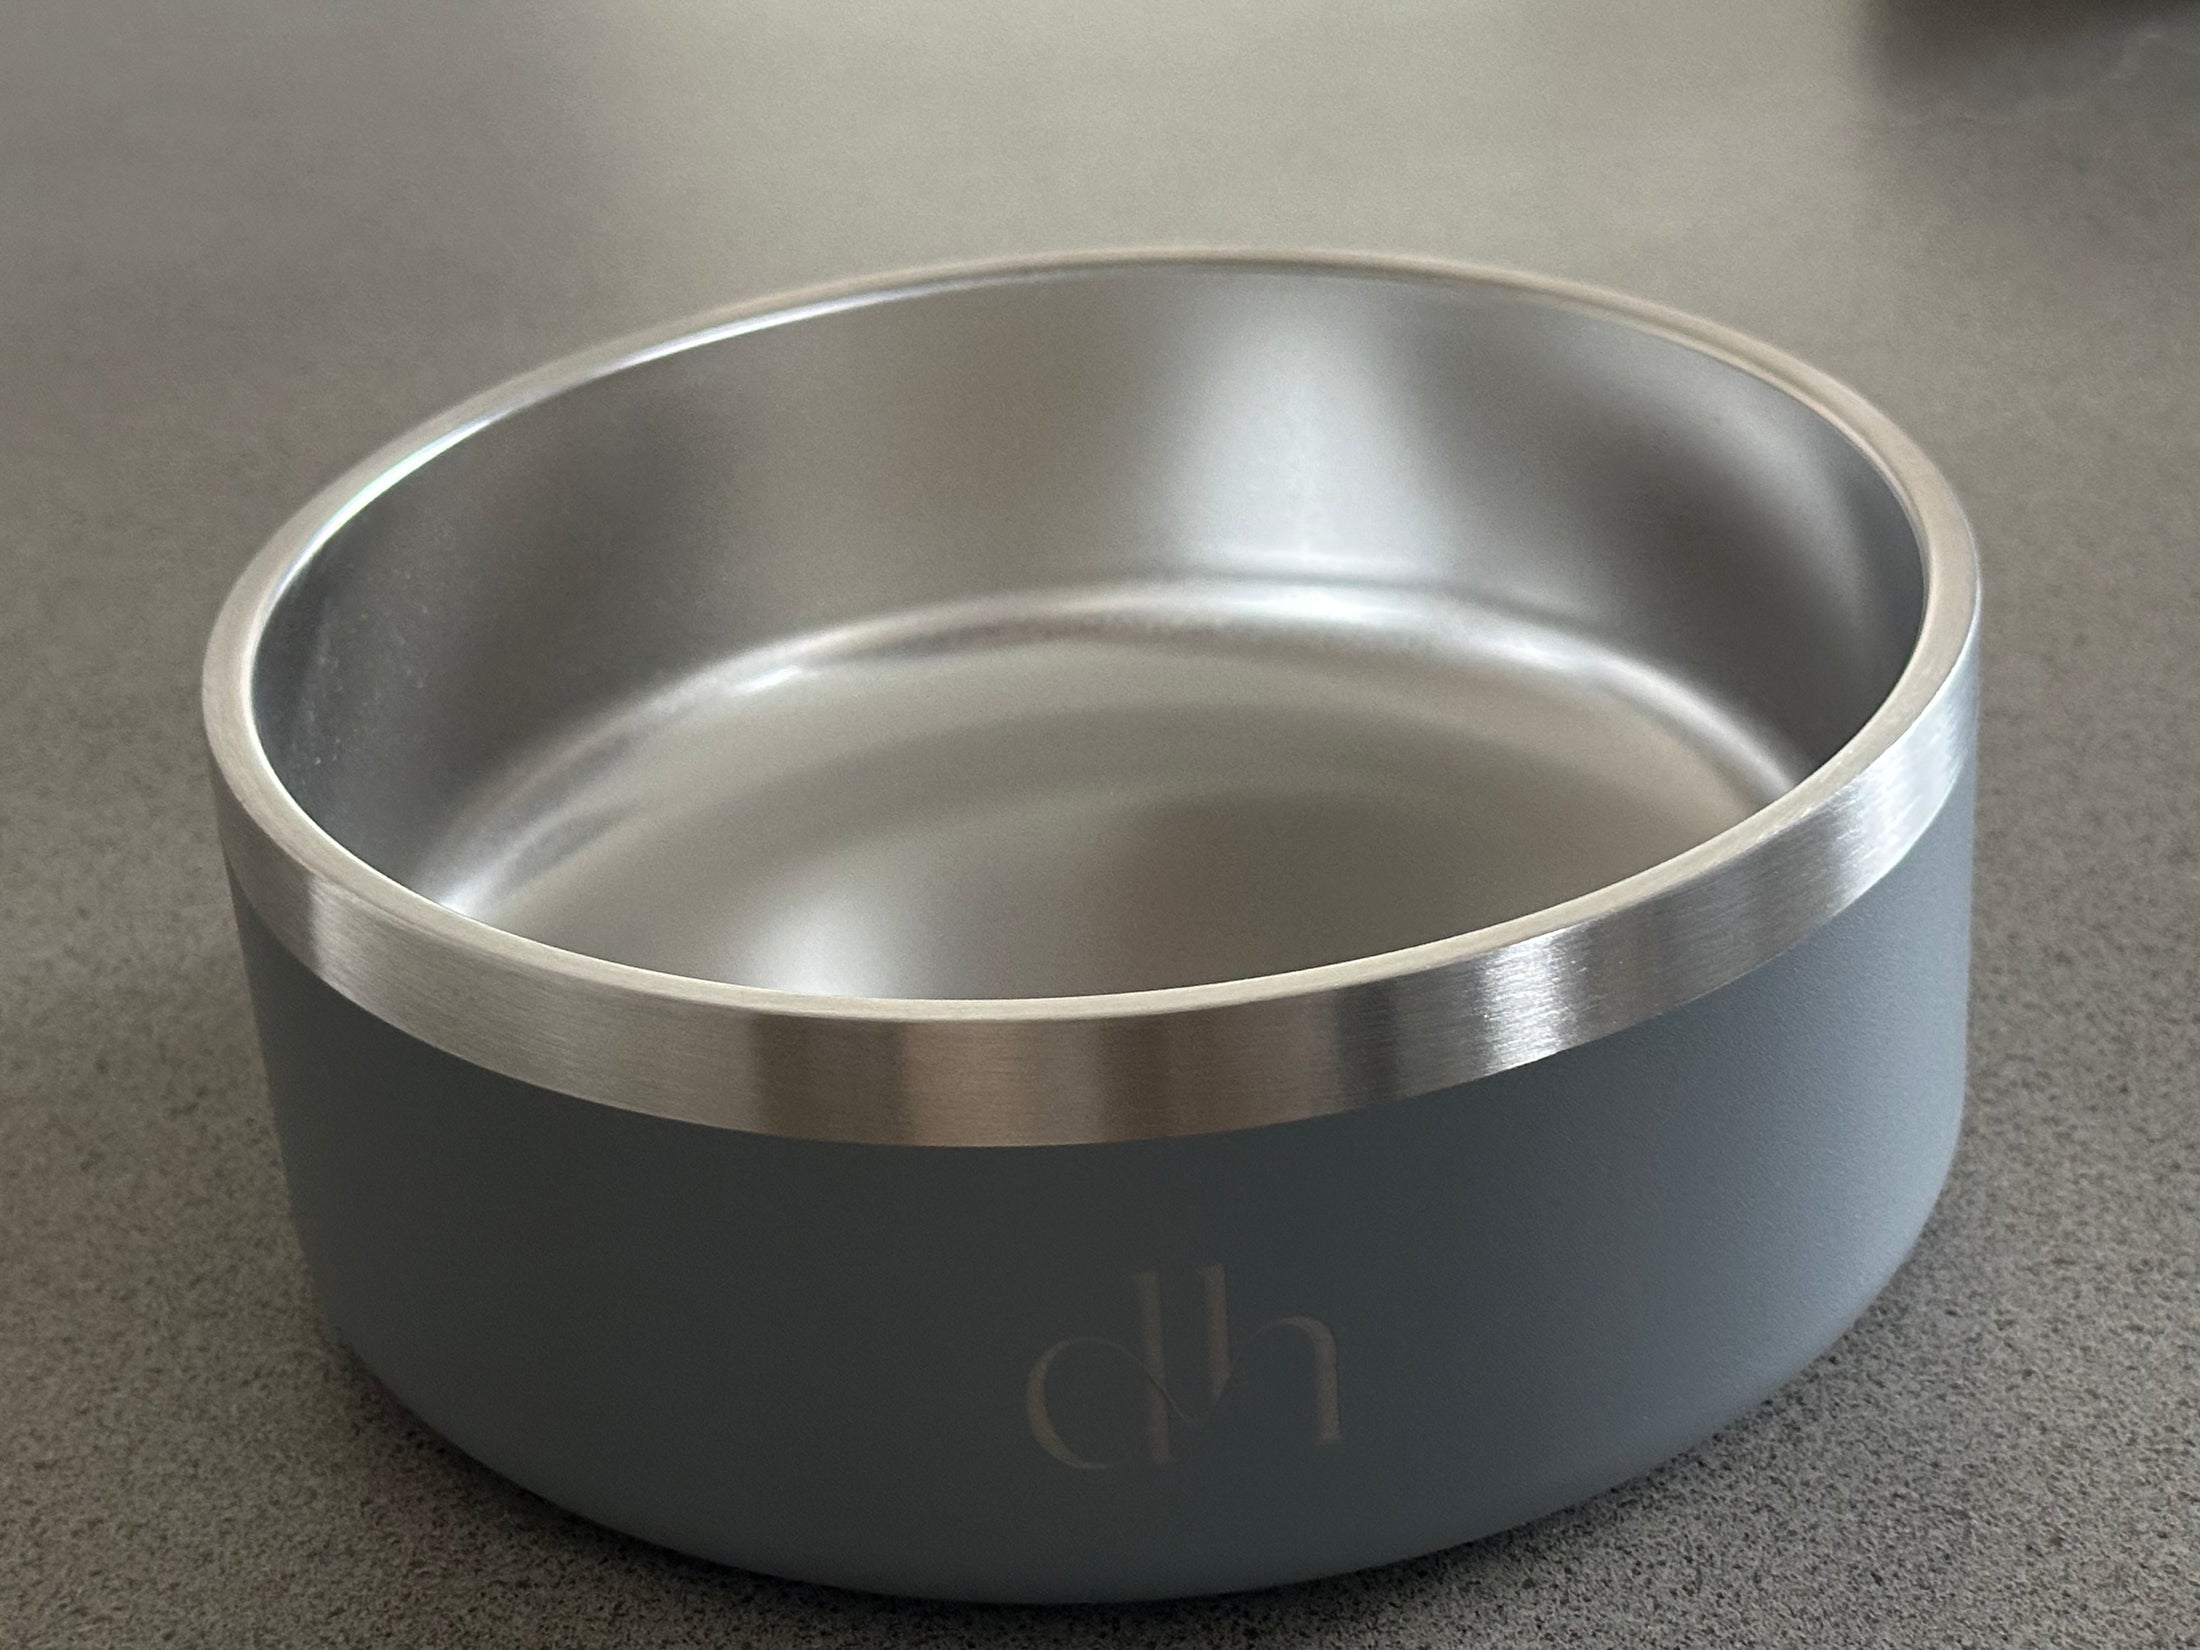 DH "YETI STYLE" Doodle Head Food/Water Bowl-Stainless Steel